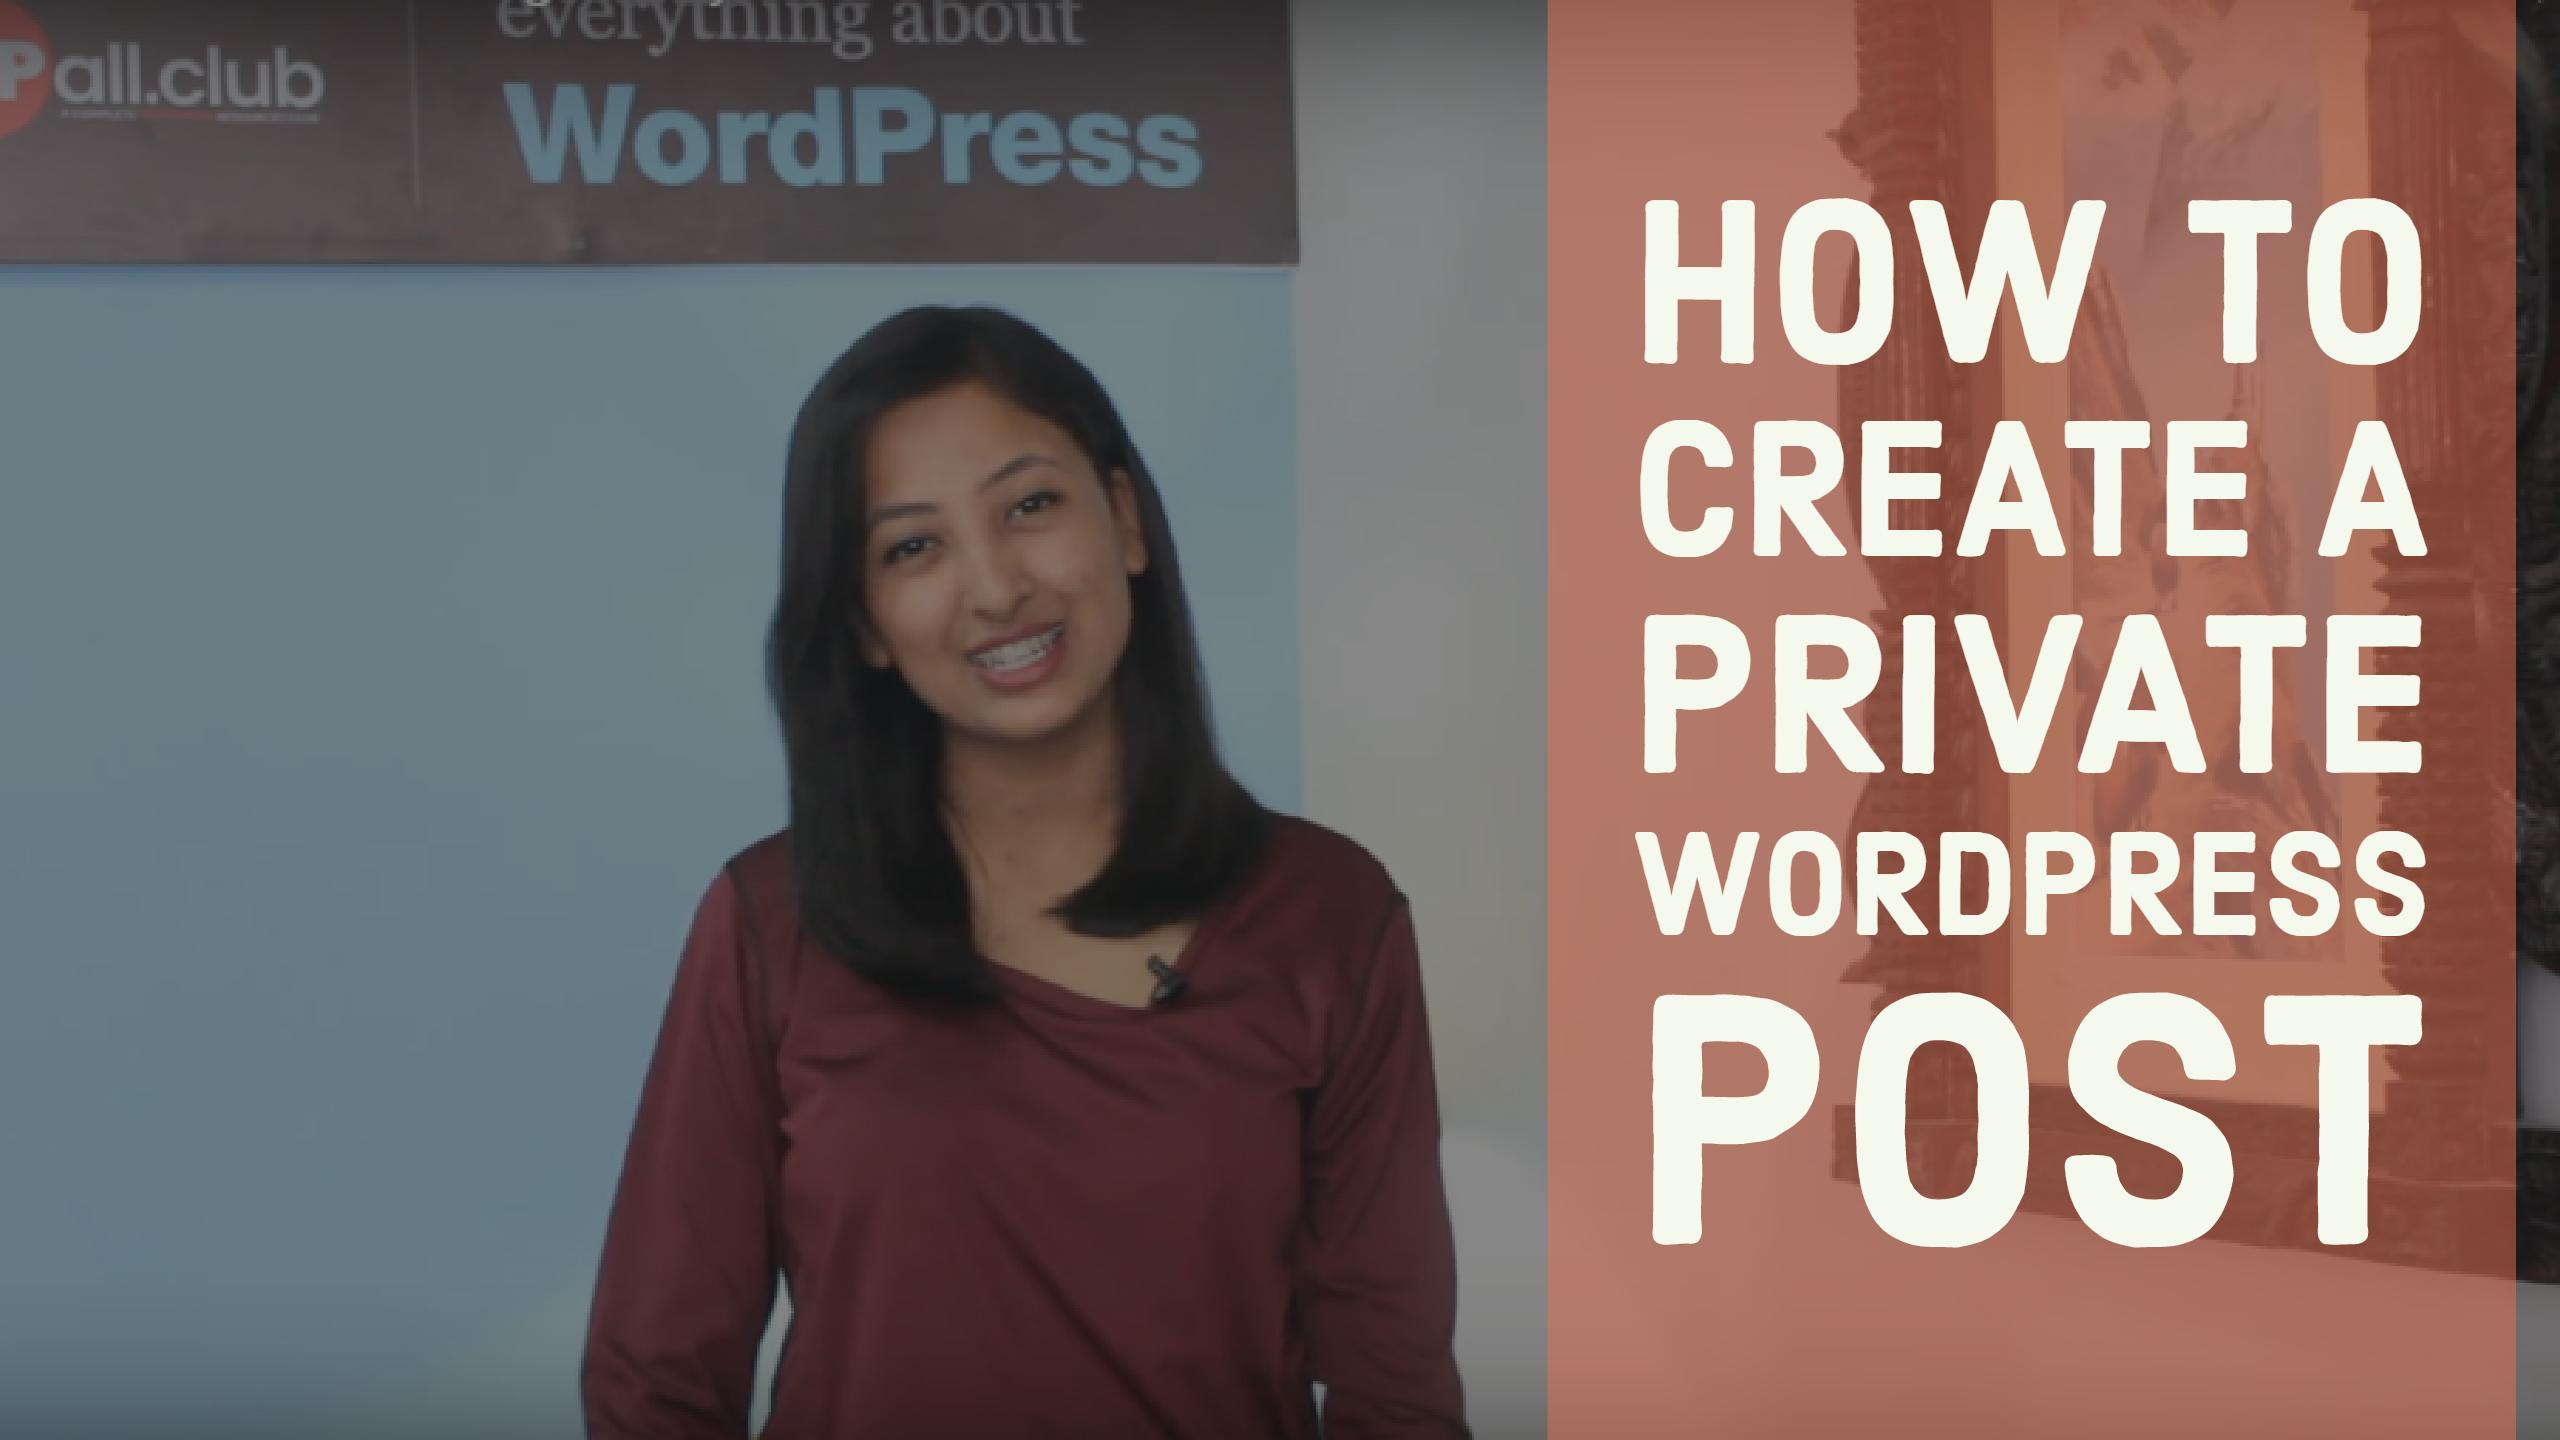 How to create a private WordPress Post